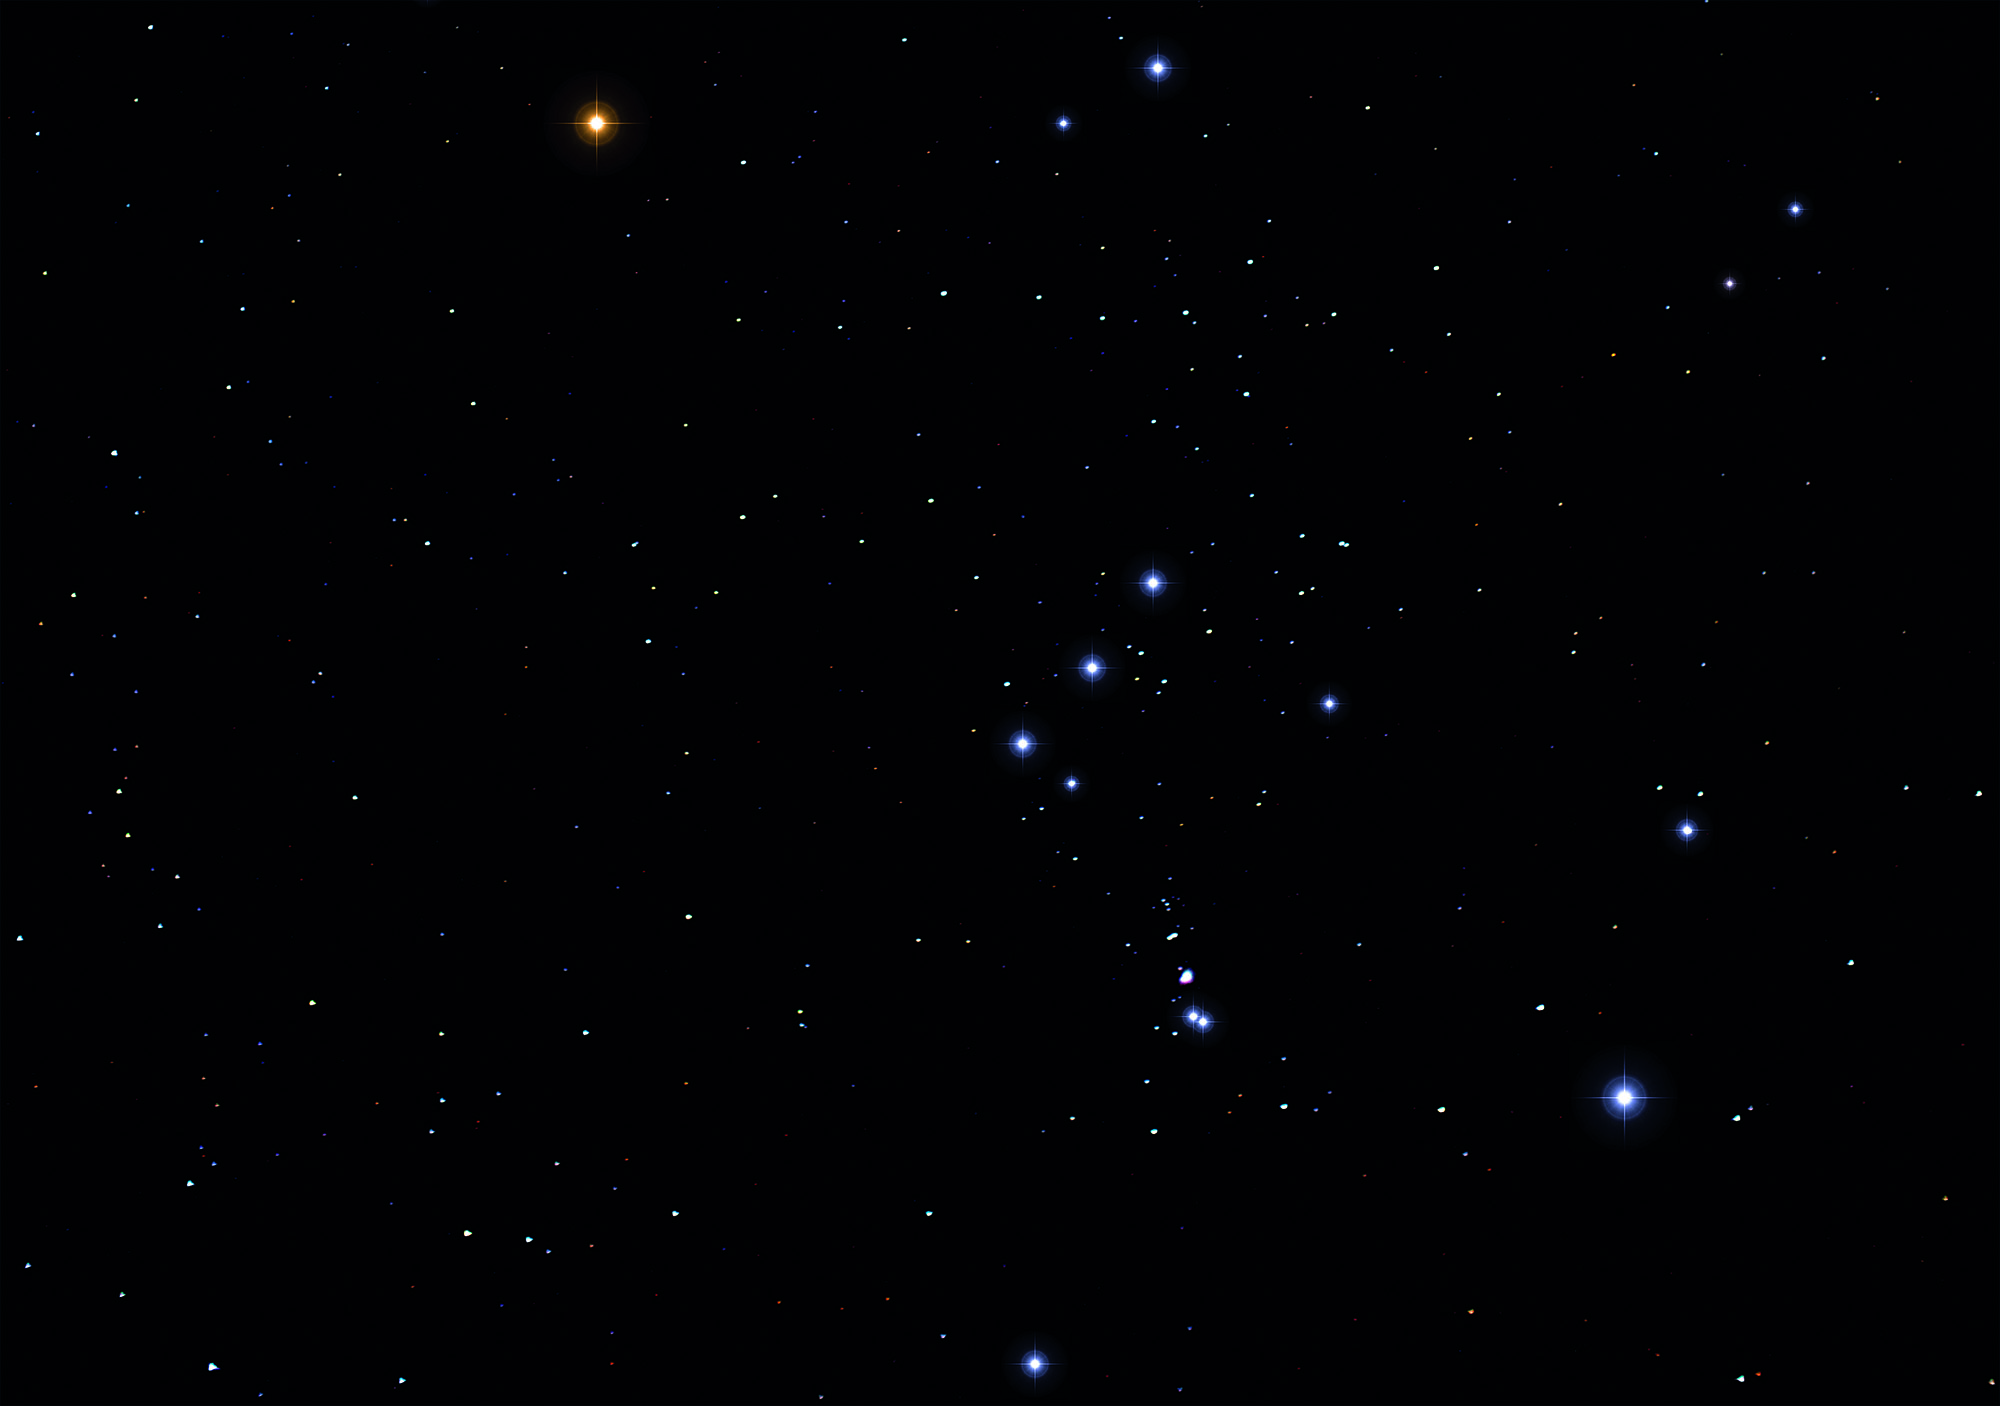 Orion a guide to the Hunter constellation